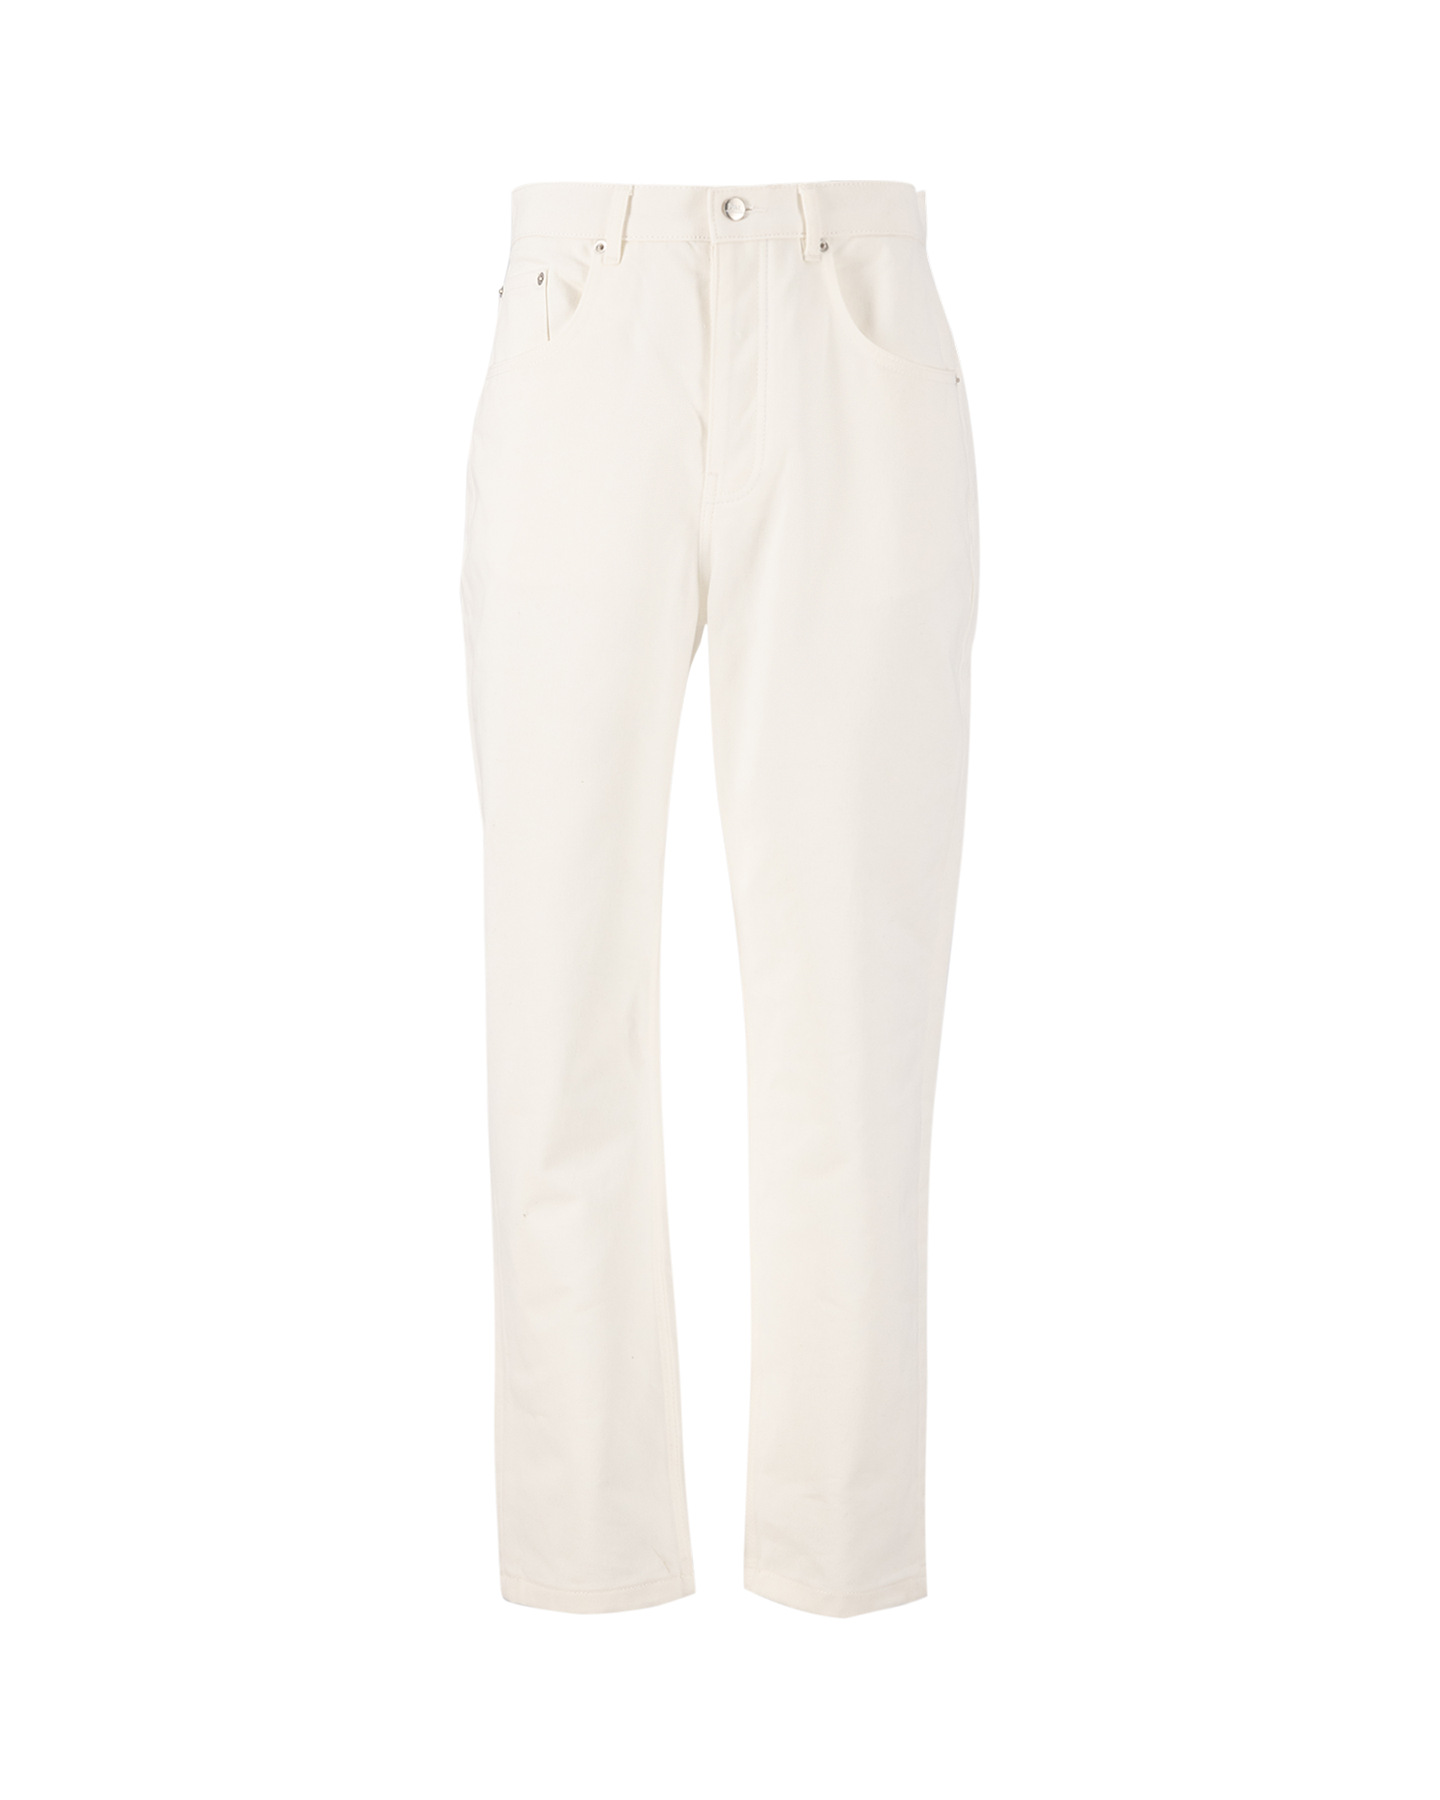 PAL Sporting Goods Off To The Races Riders Pants OFFWHITE 1